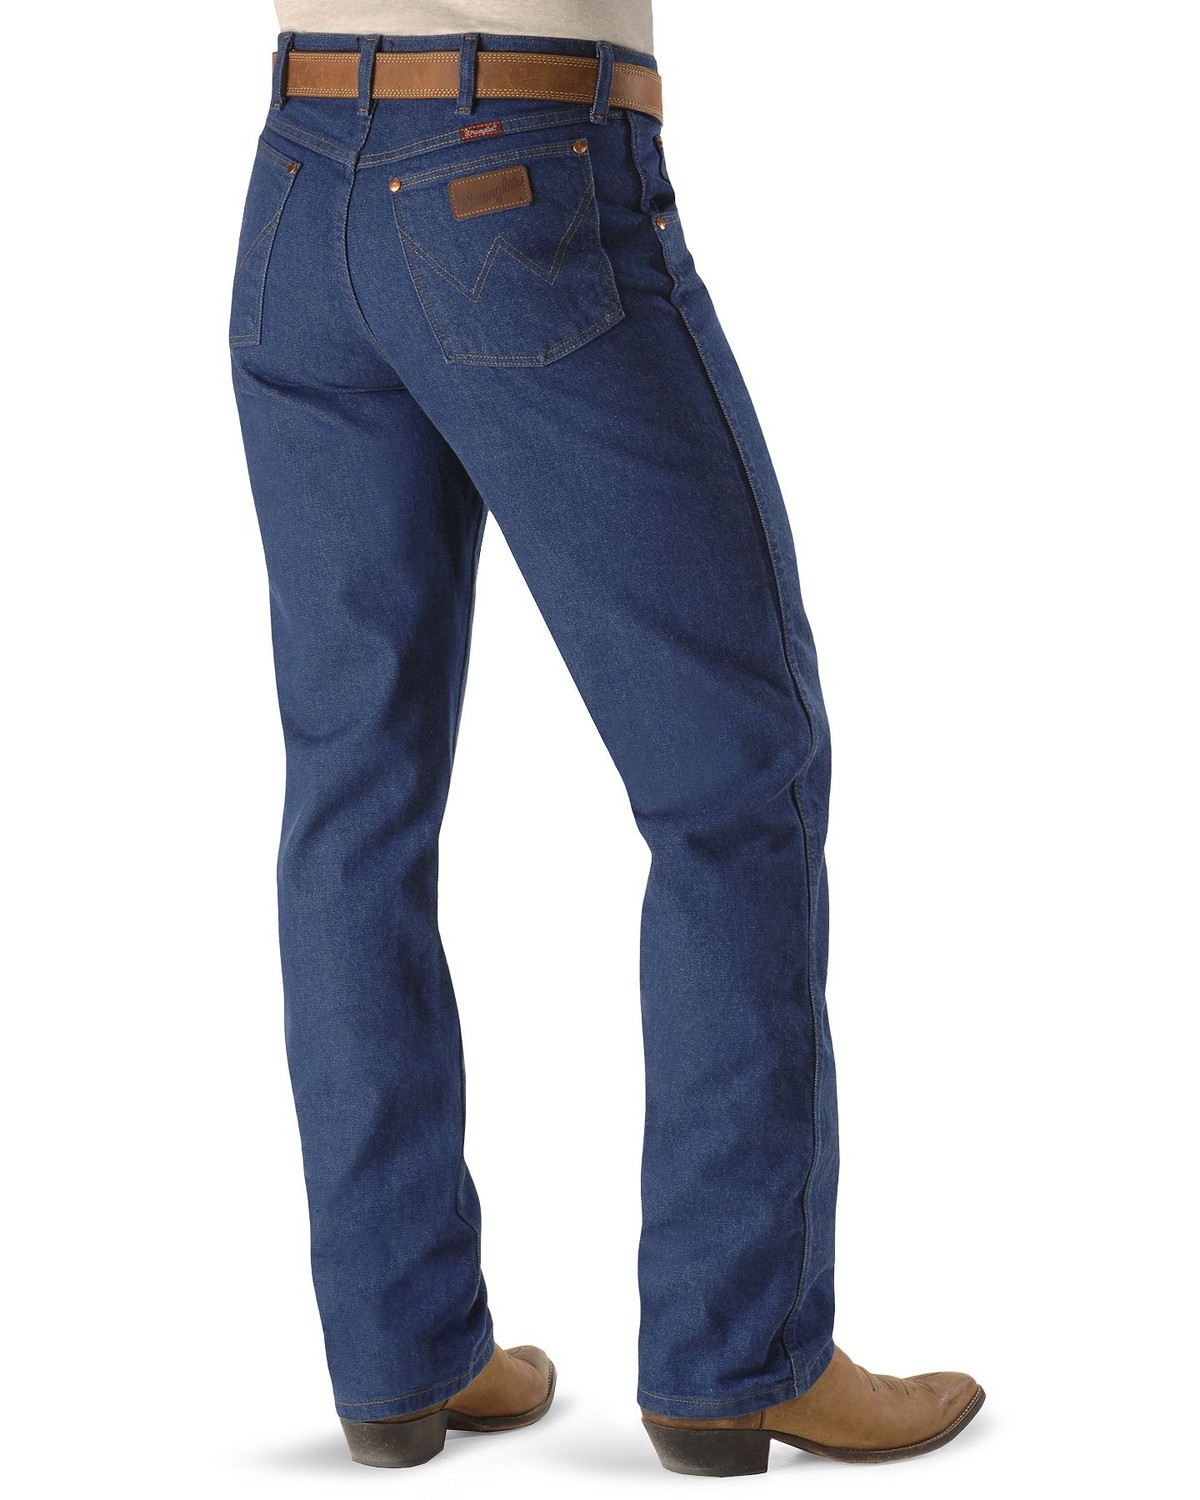 Wrangler 31MWZ Cowboy Cut Relaxed Fit 